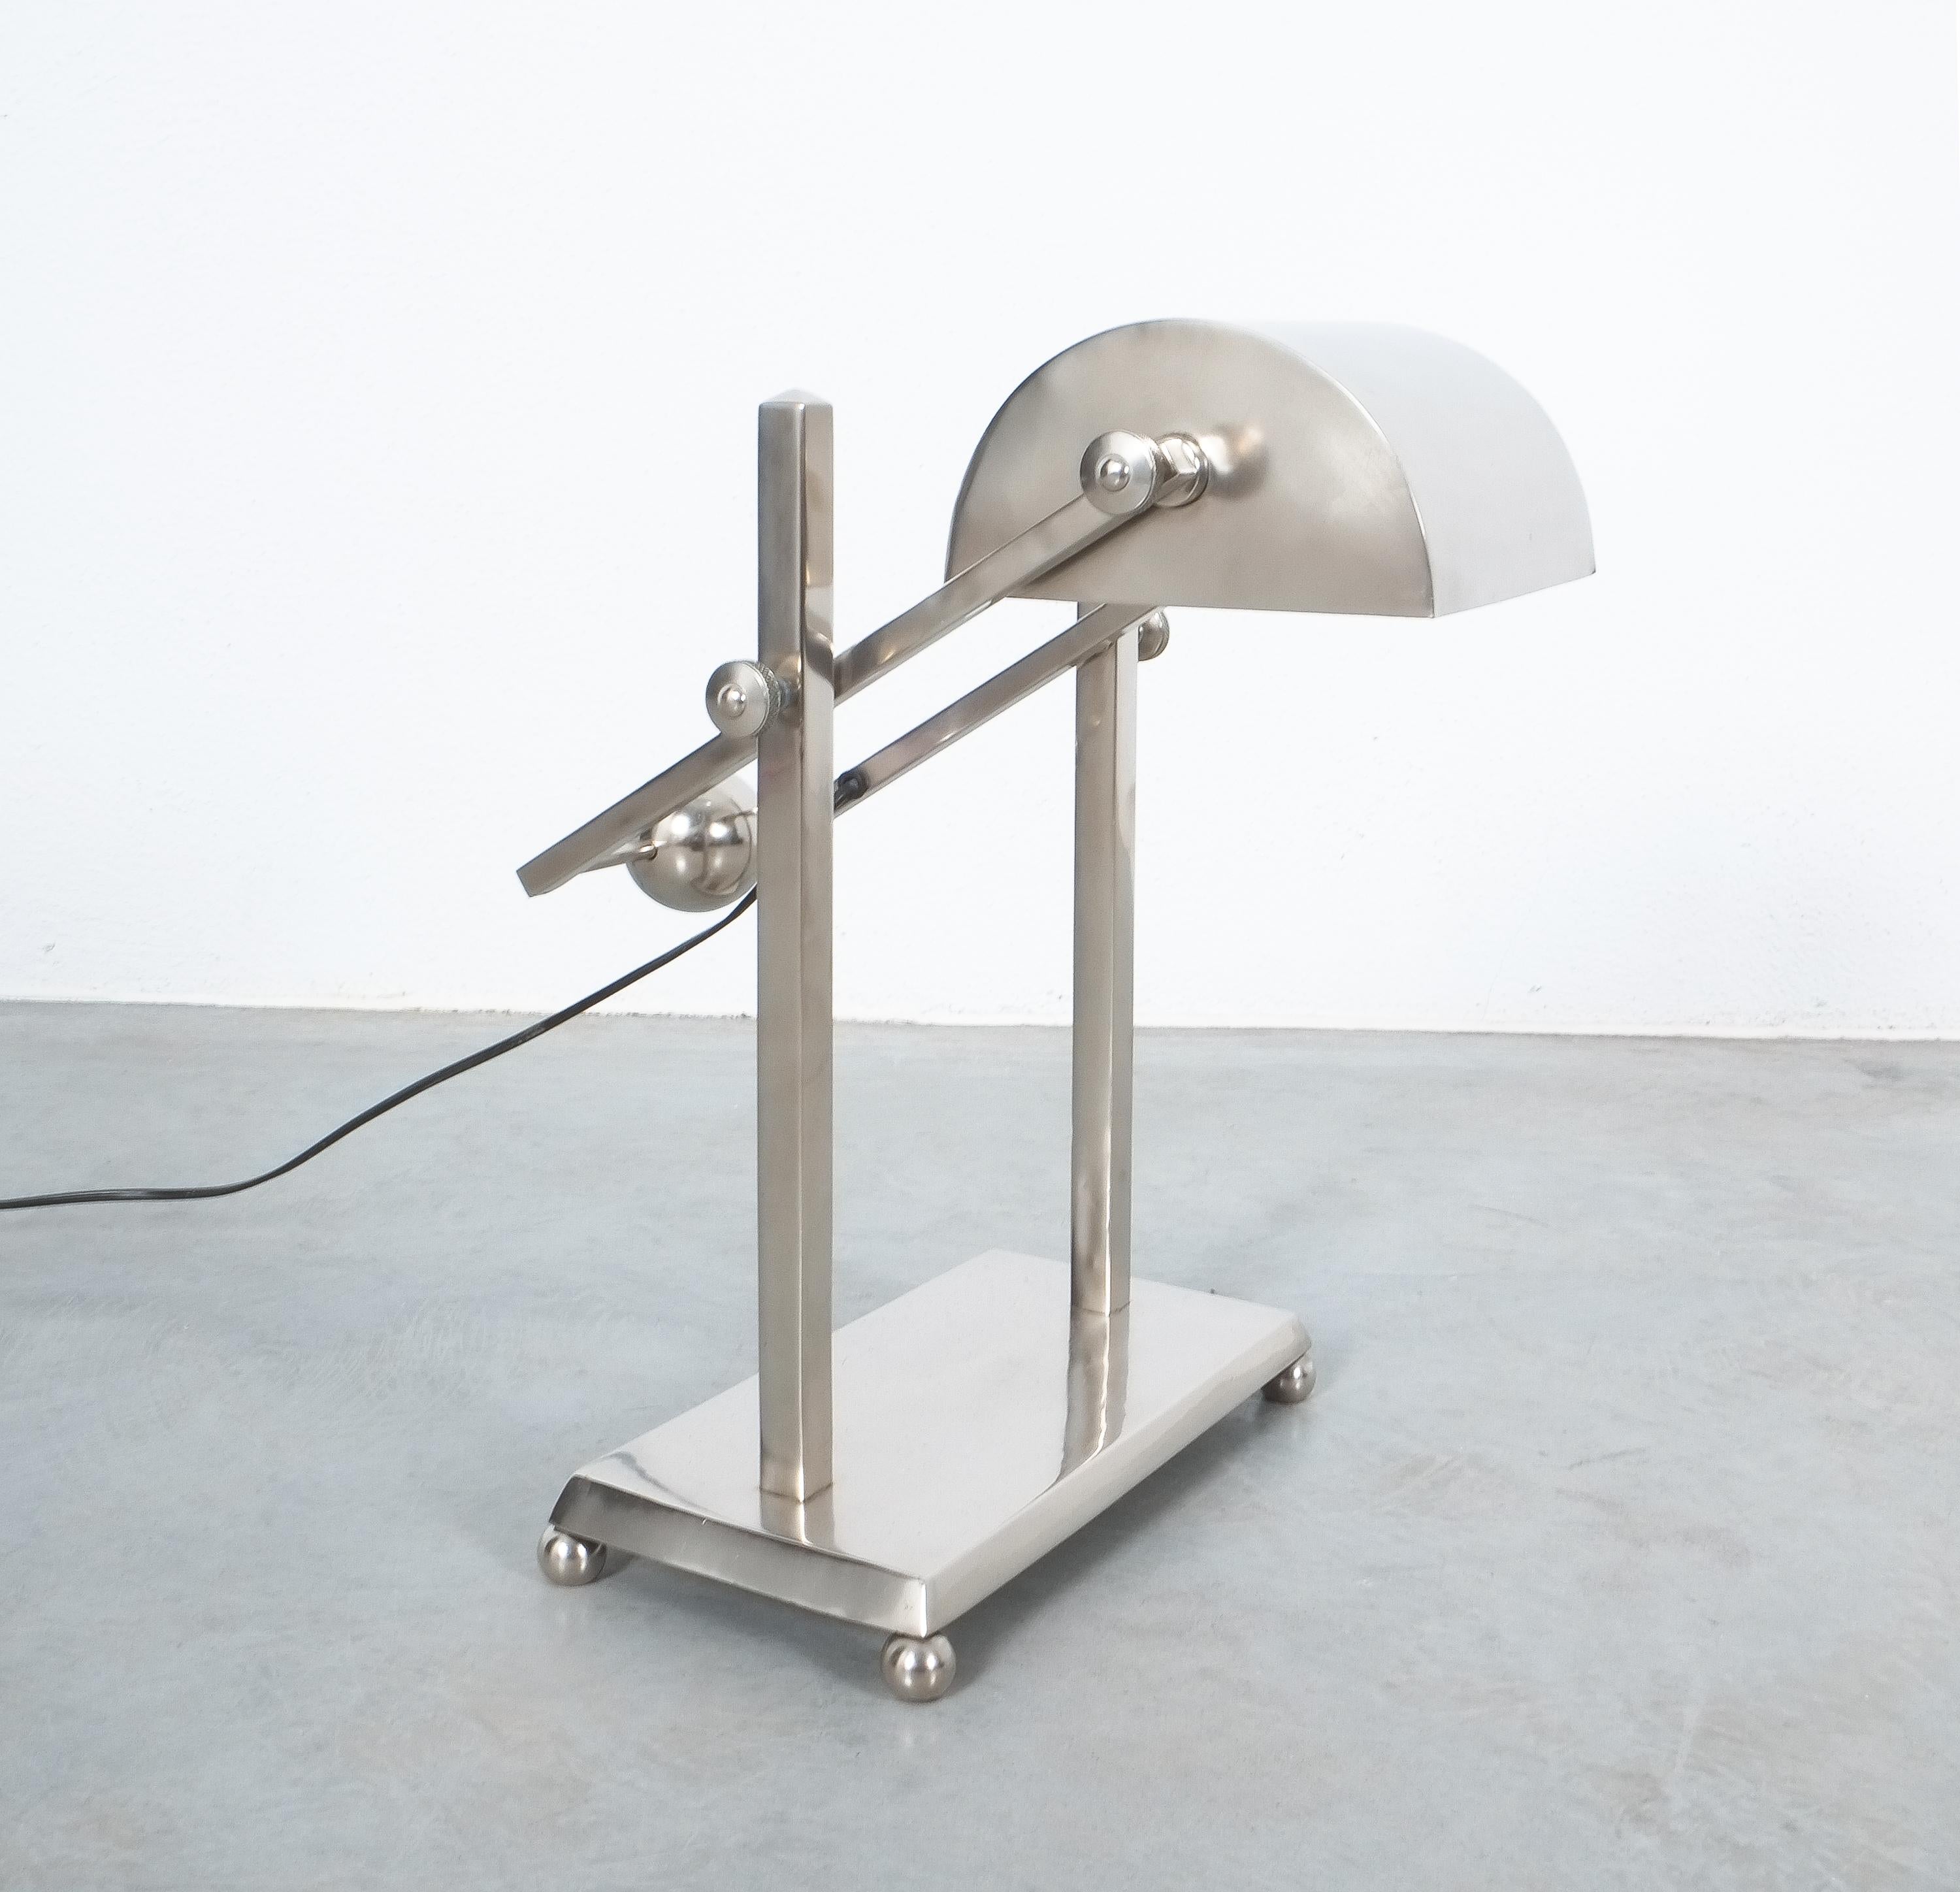 Nickeled counter-balance table lamp unattributed in very good condition, France, circa 1935

Fine desk lamp in the style of Jacques Adnet with a solide movable counterweight and very well executed metalwork. Elegant piece that can be adjusted in any